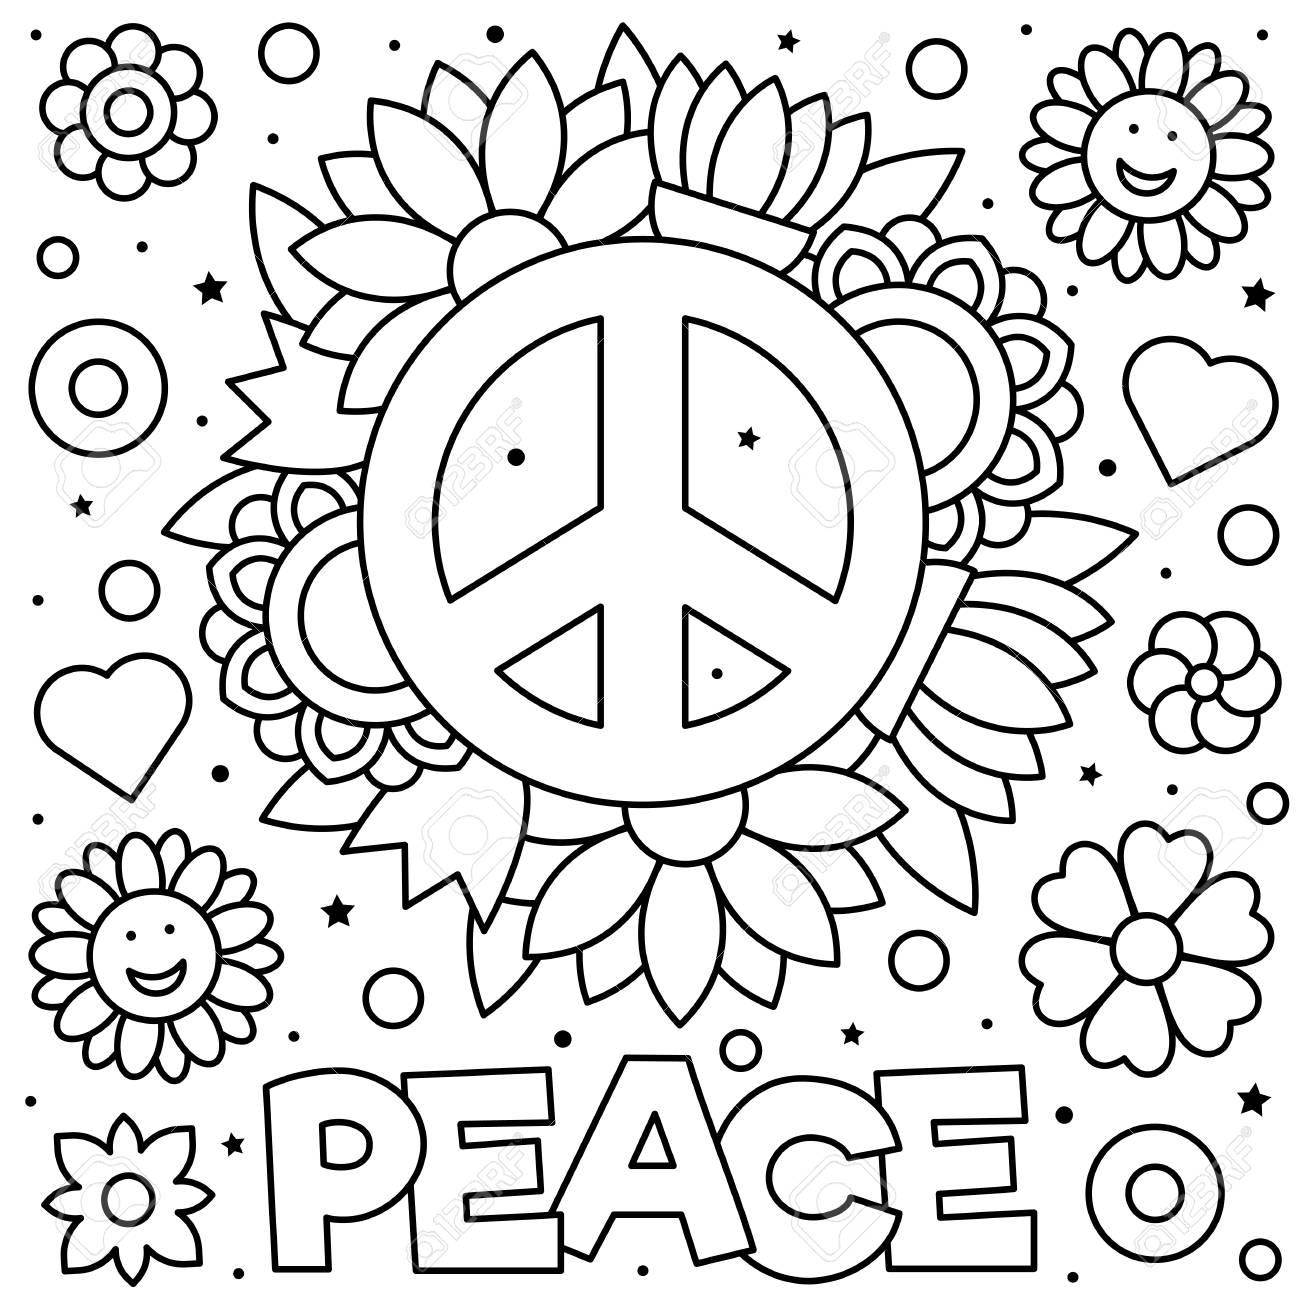 Peace sign coloring page black and white vector illustration royalty free svg cliparts vectors and stock illustration image